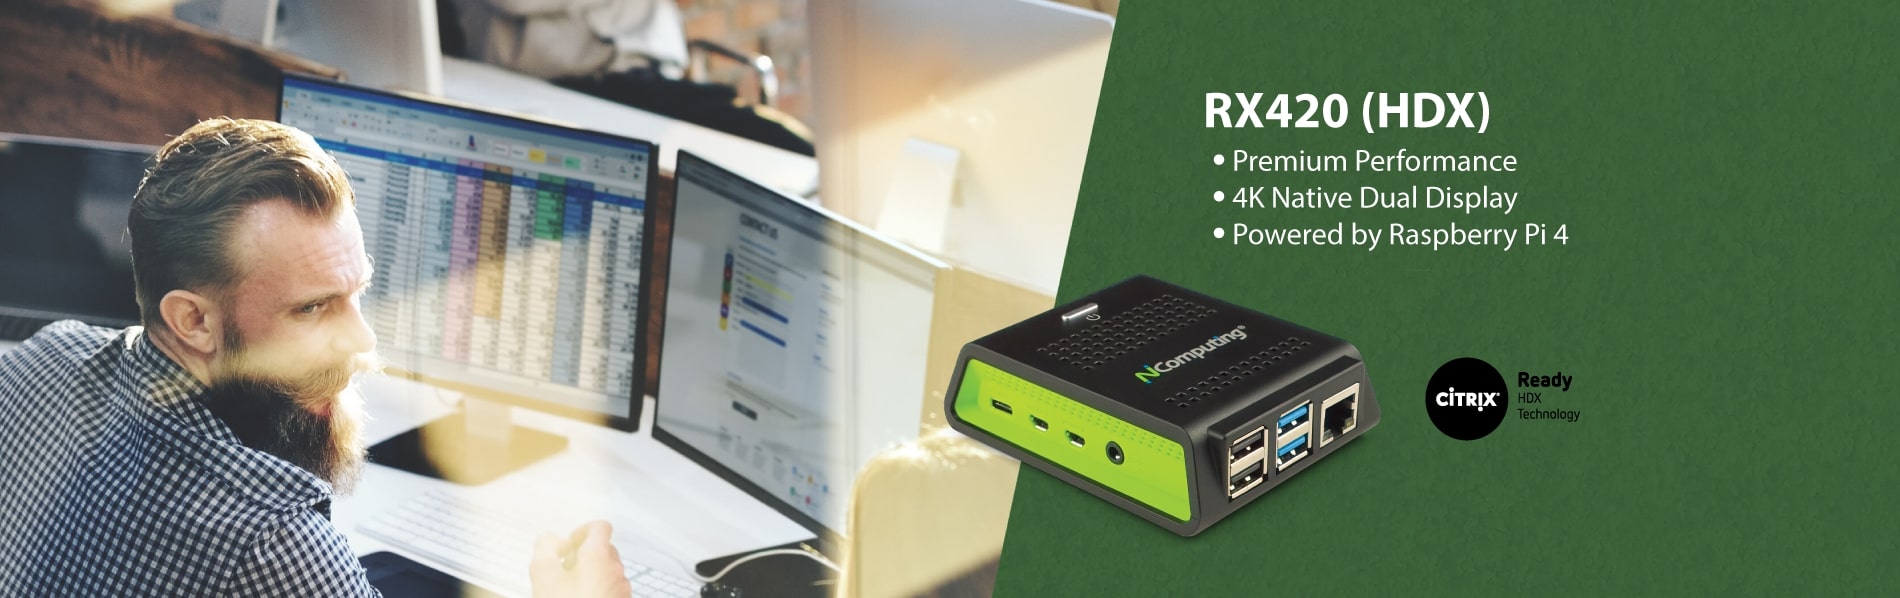 NComputing RX420(HDX) product landing page banner